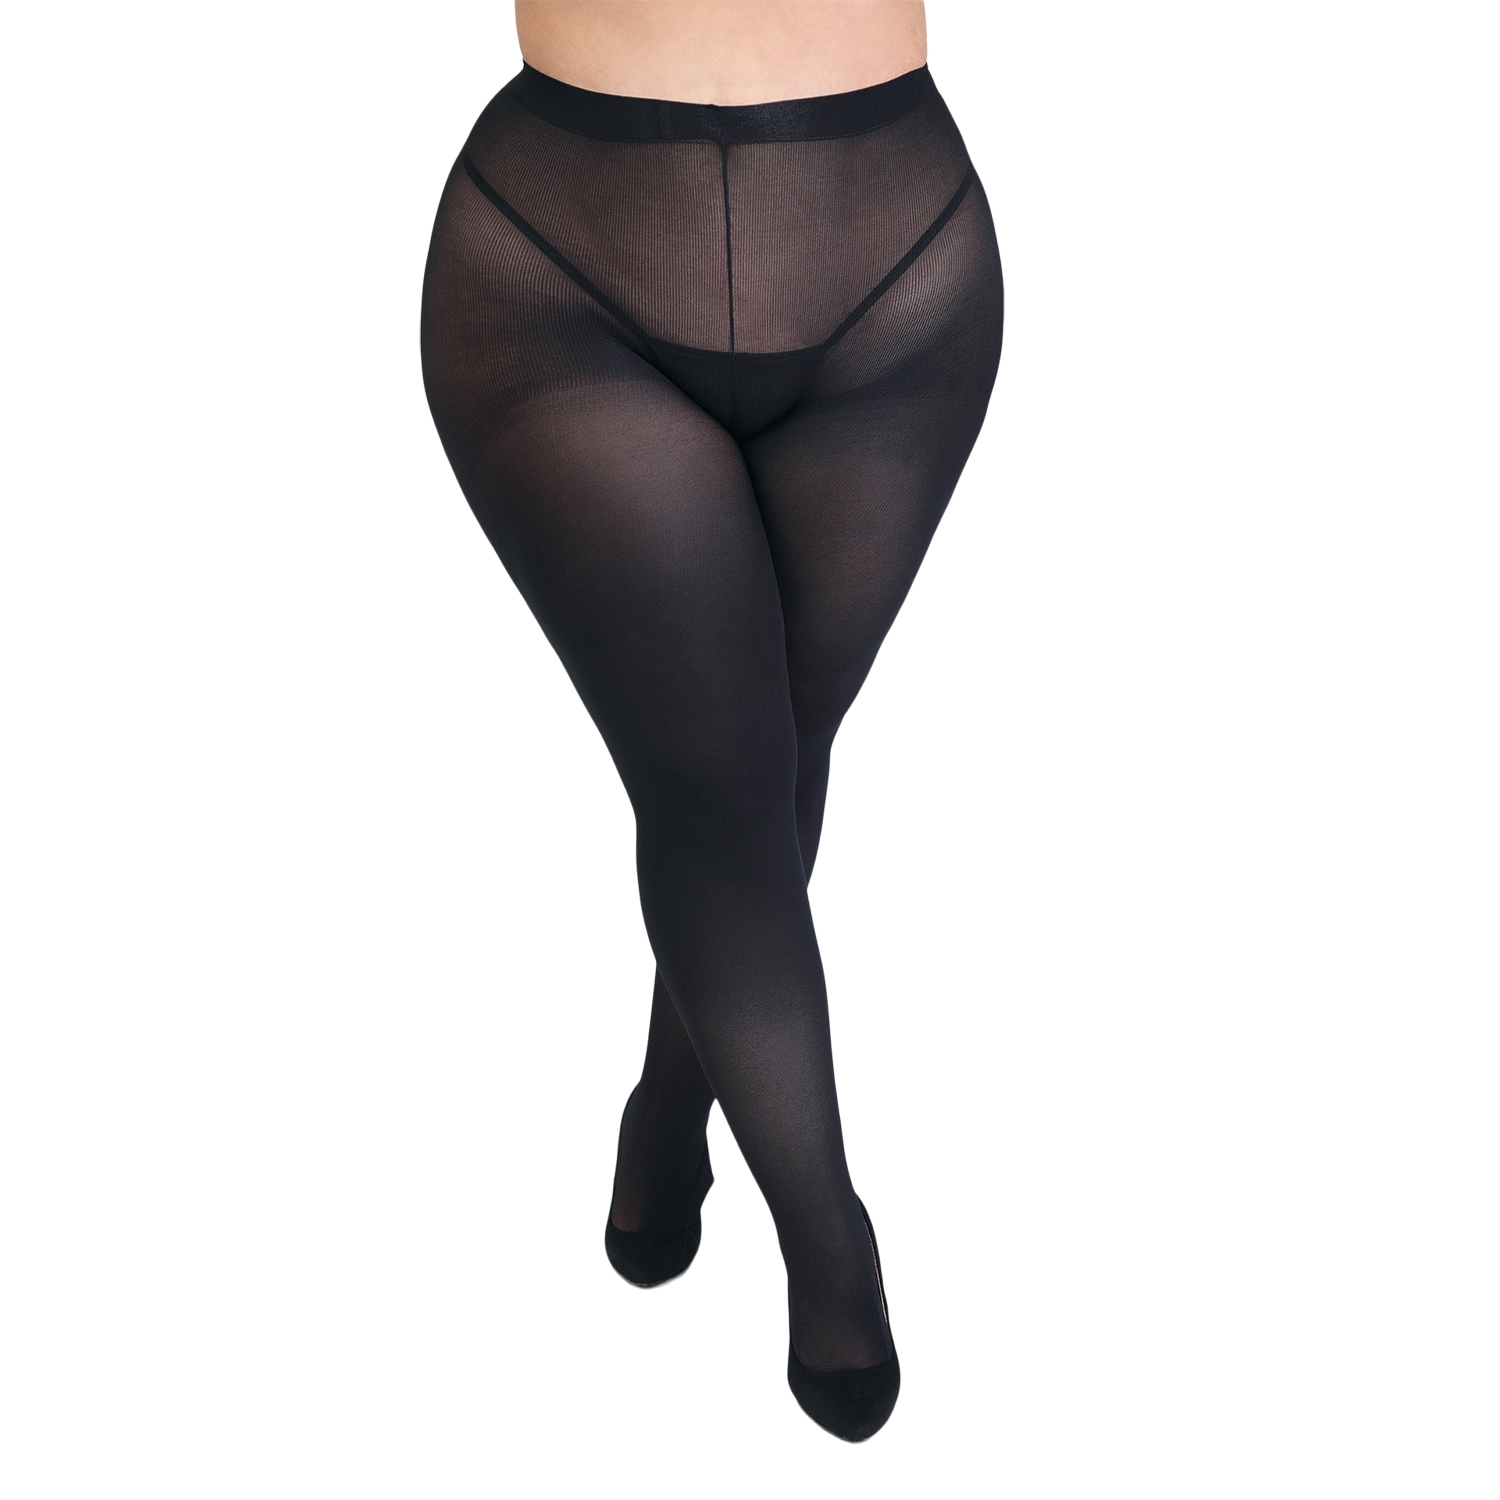 Fifty Shades Of Grey Captivate Plus Size Spanking Tights - Black - Plus size